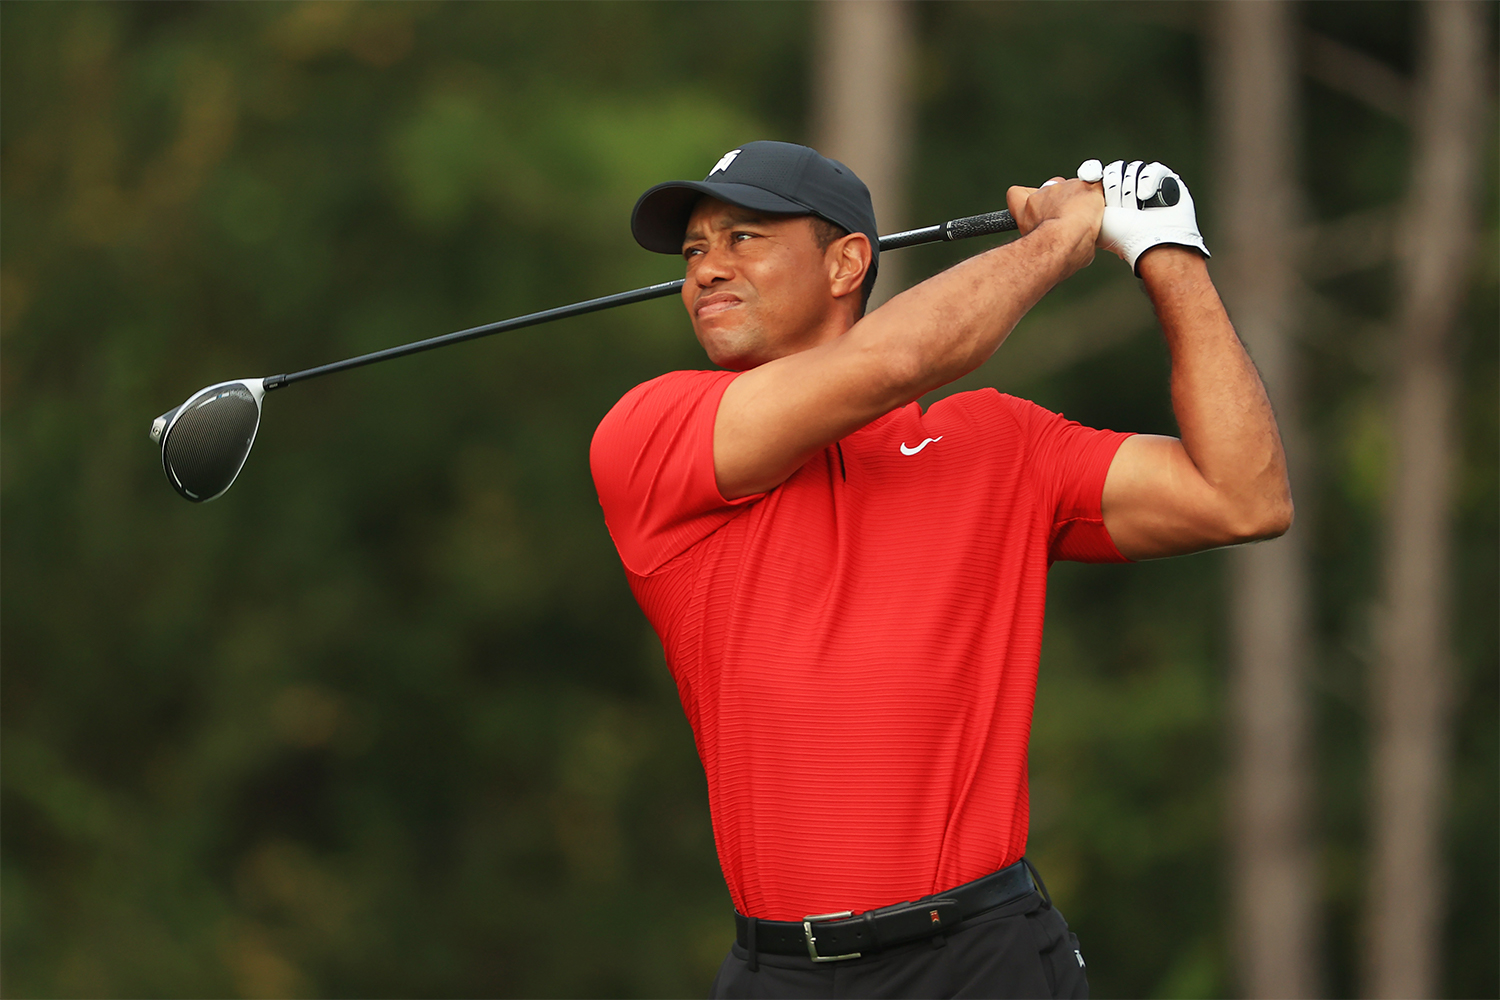 What Are the Chances Tiger Woods Makes a Comeback? - InsideHook